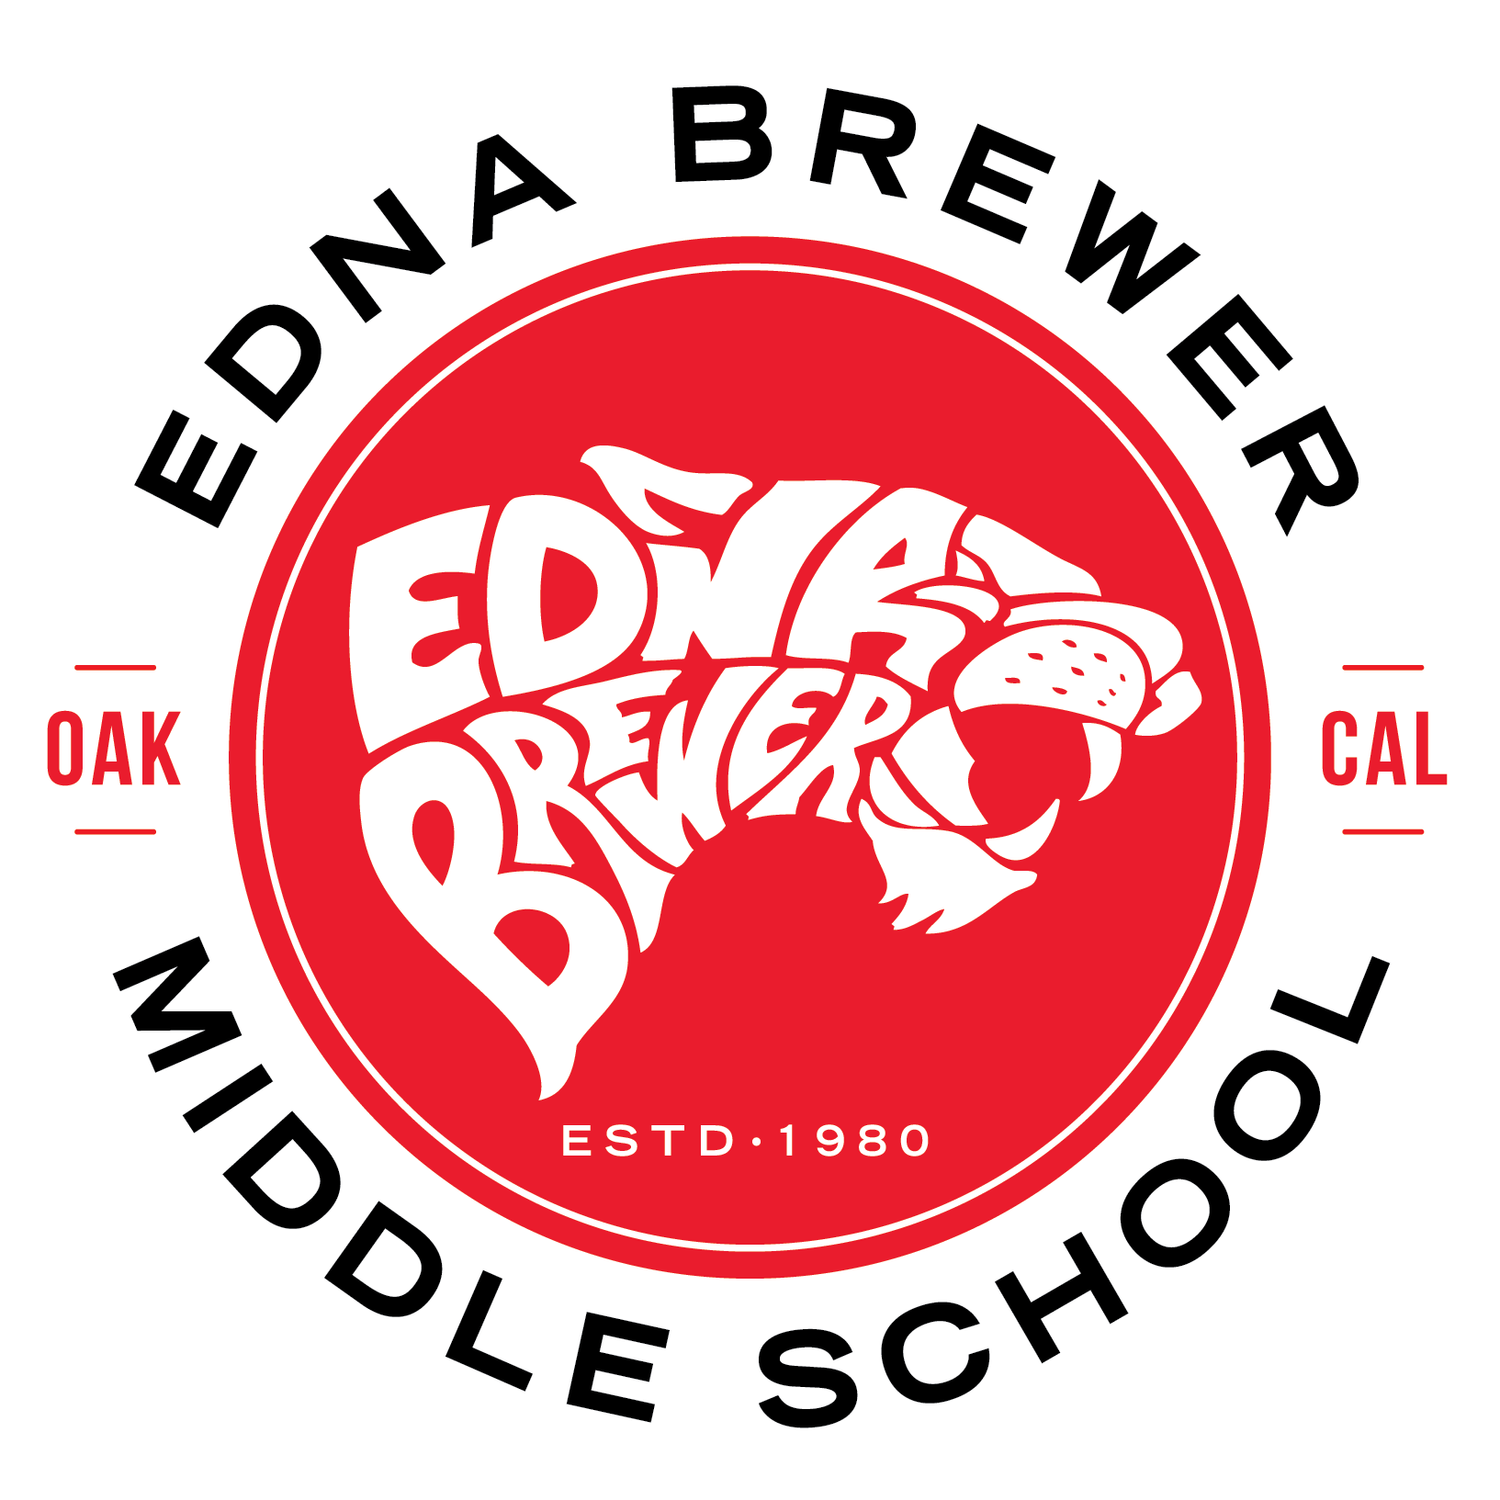 Edna Brewer Middle School